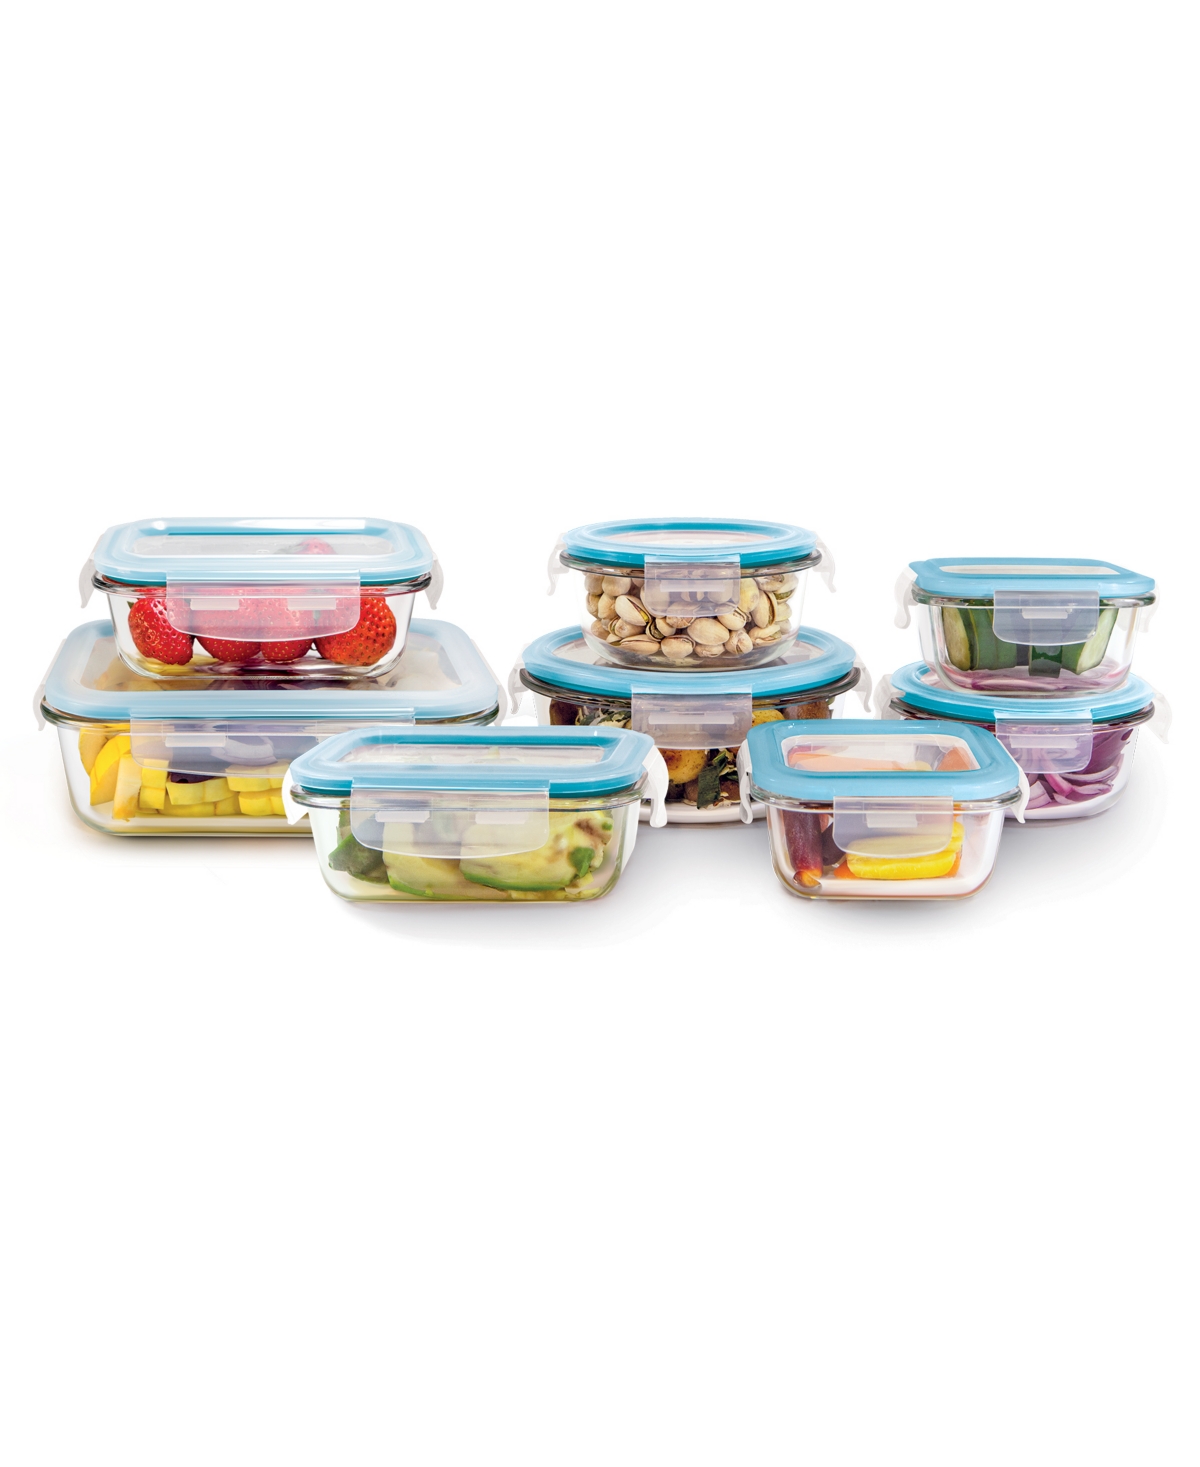 Art & Cook 16 Piece Mixed Glass Food Storage Set In Blue